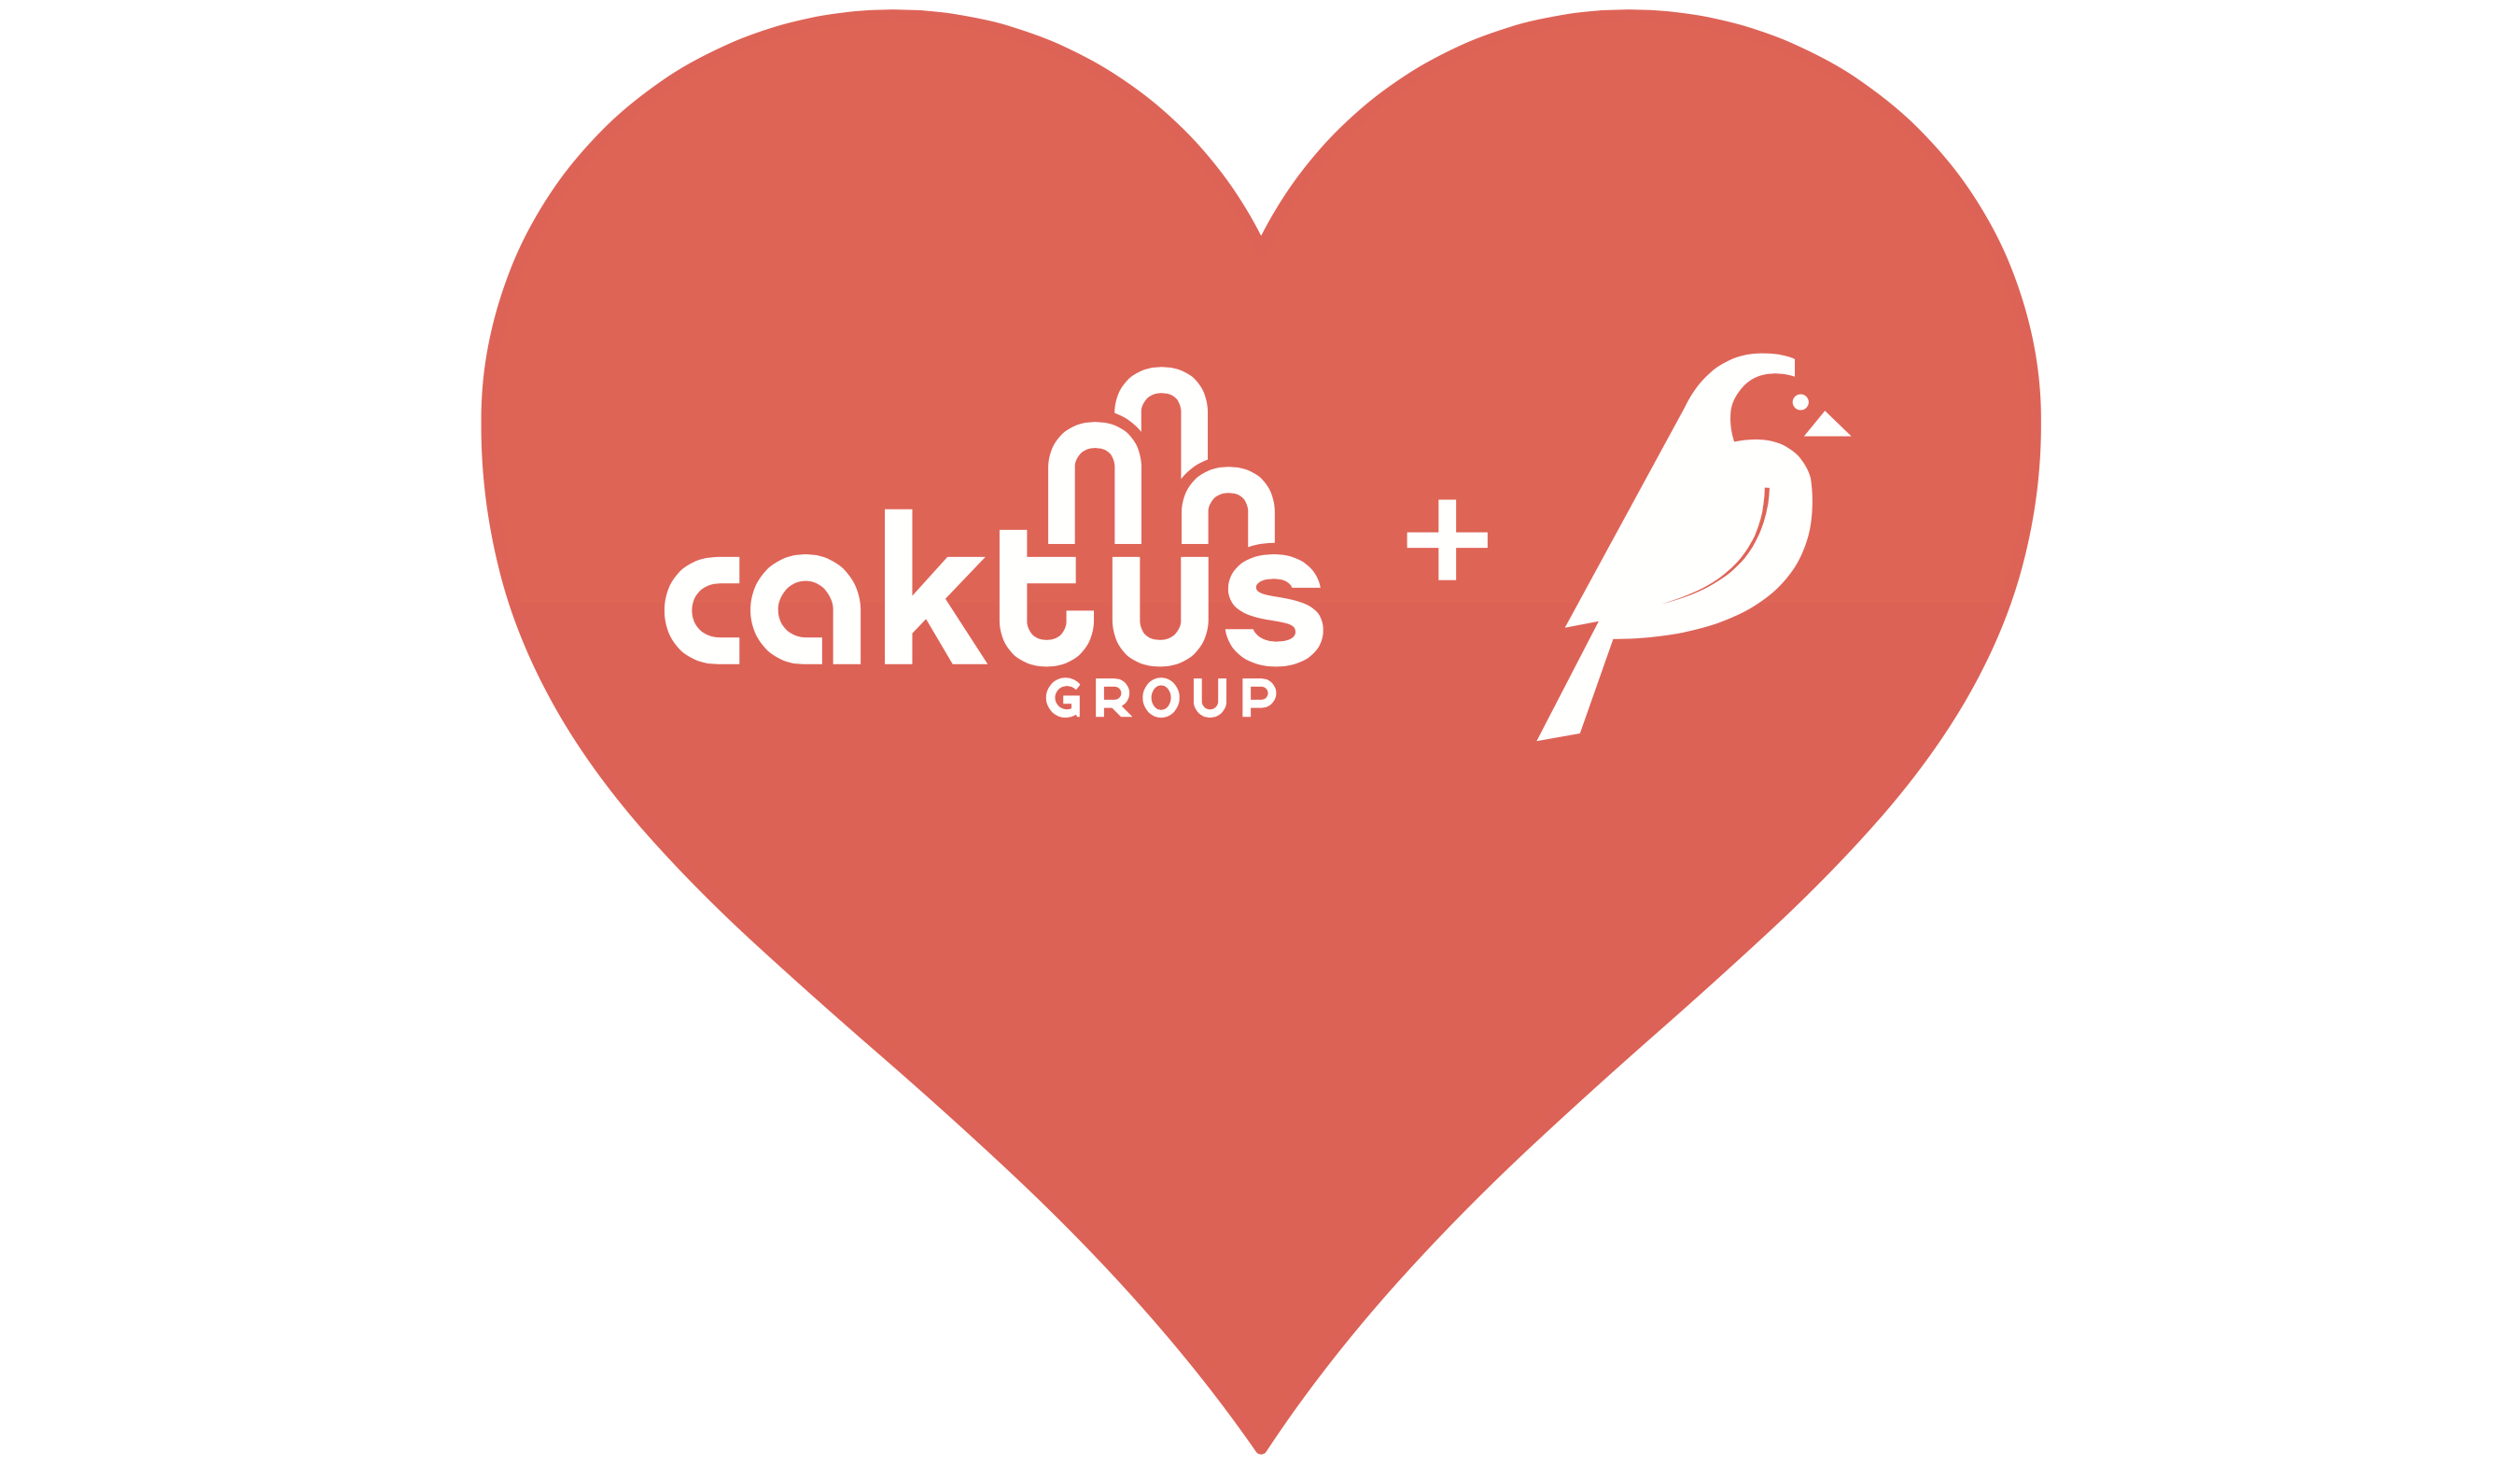 Caktus Group + Wagtail logos in a red heart